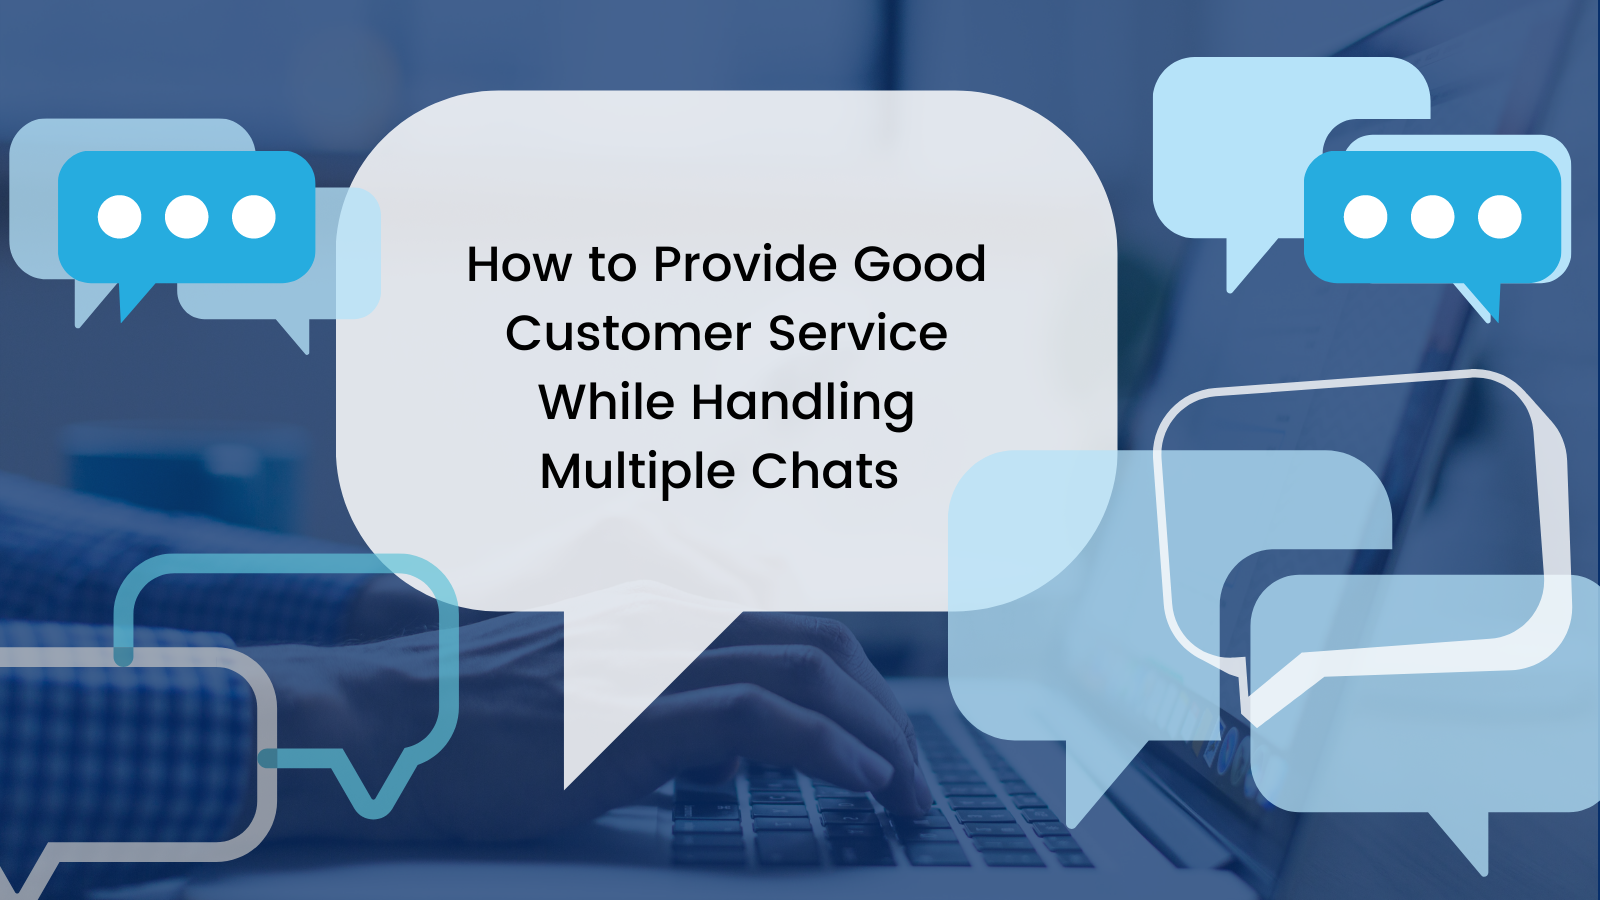 Provide good customer service while handling multiple chats